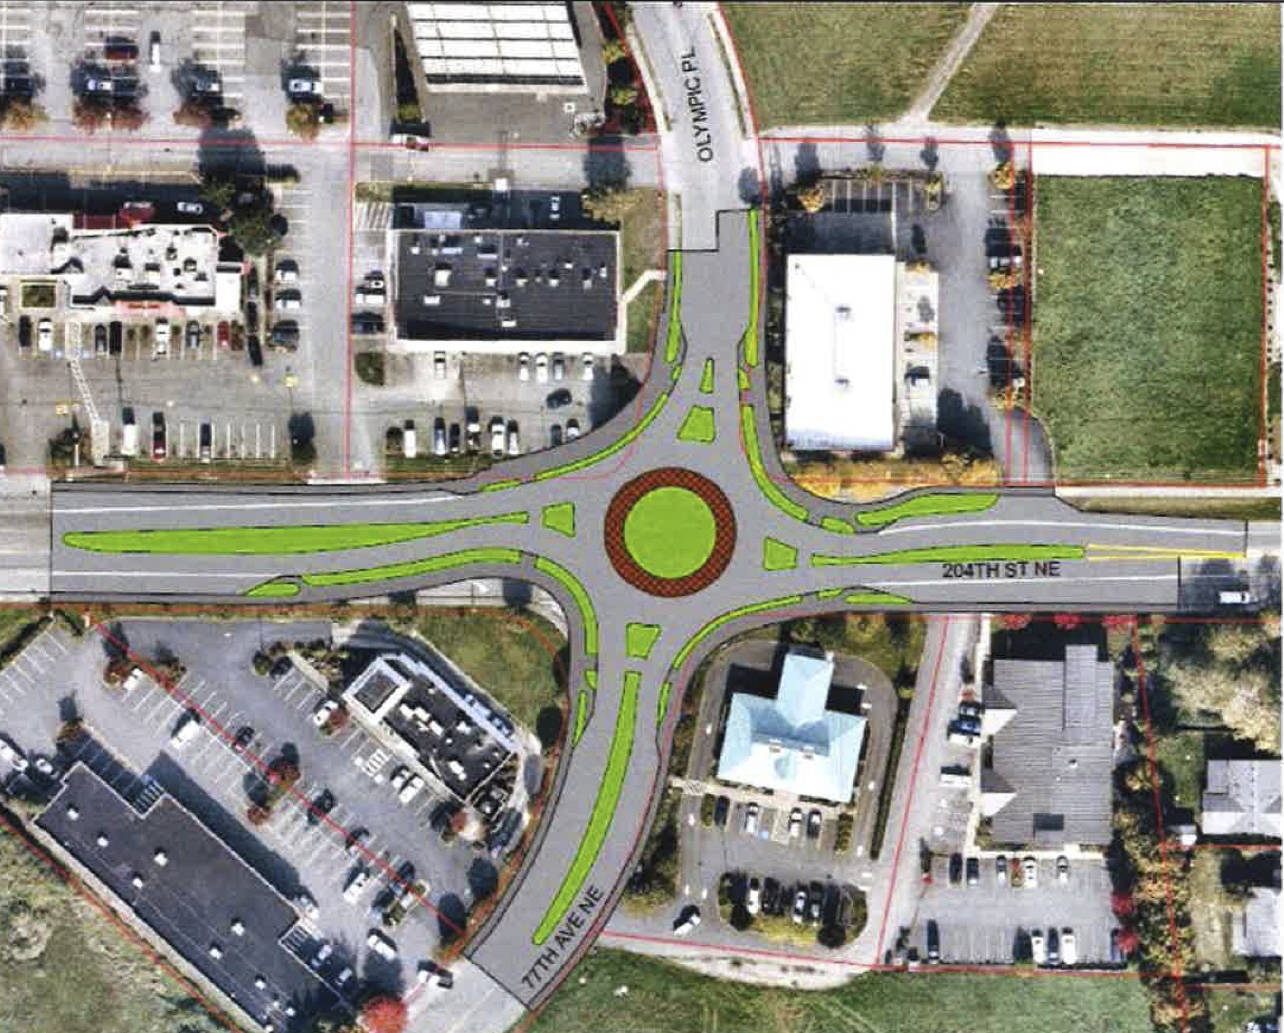 Arlington to get $1.6M grant for 204th Street roundabout, problem intersection off Hwy 9